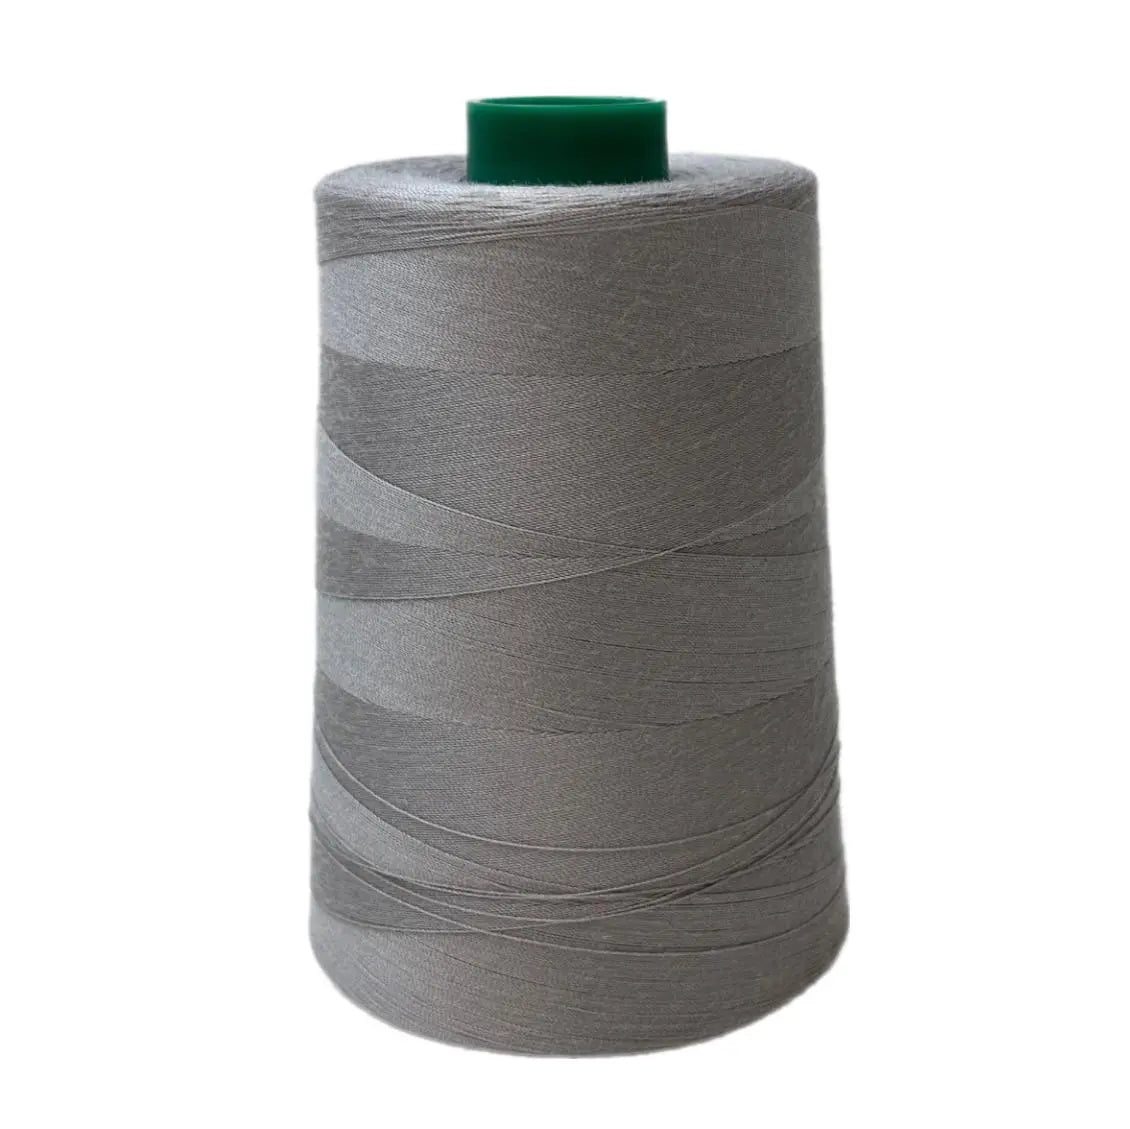 W32020 Silver Perma Core Tex 40 Polyester Thread American & Efird Permacore